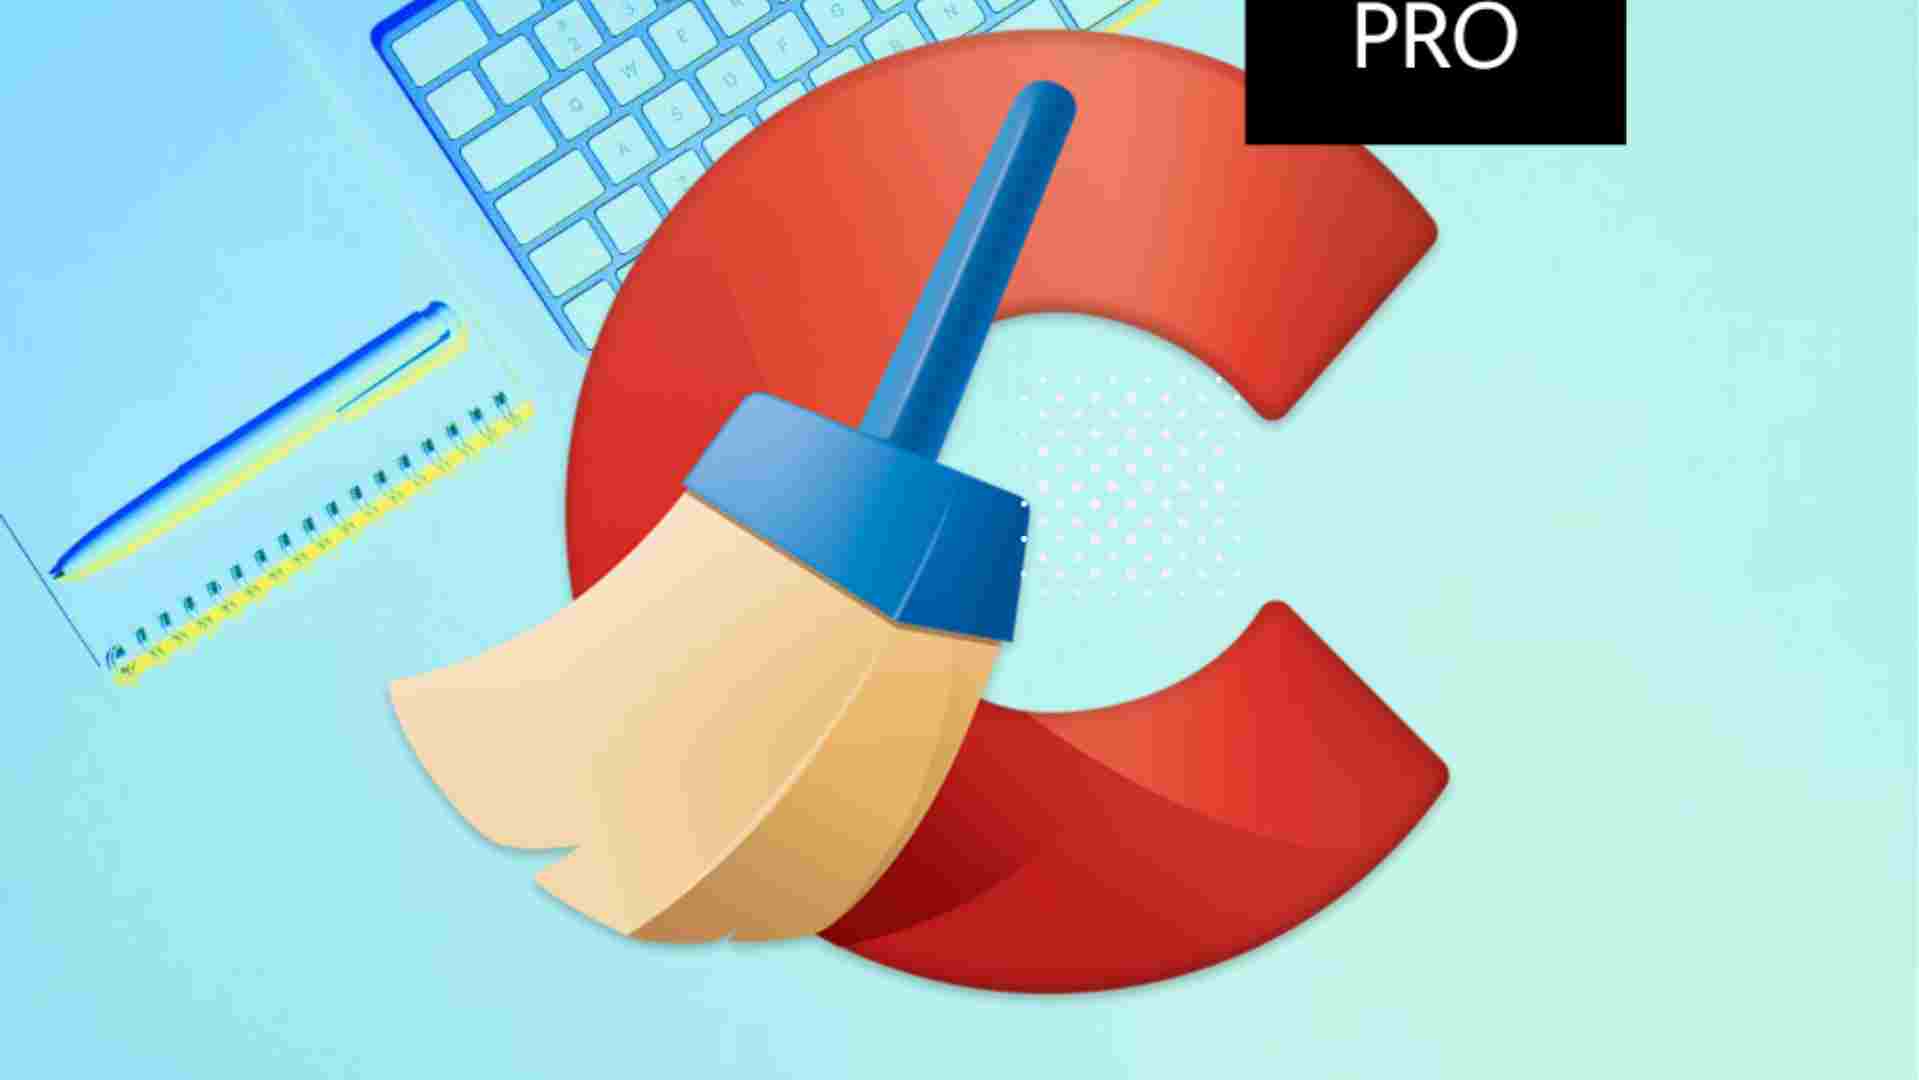 ccleaner pro full free download